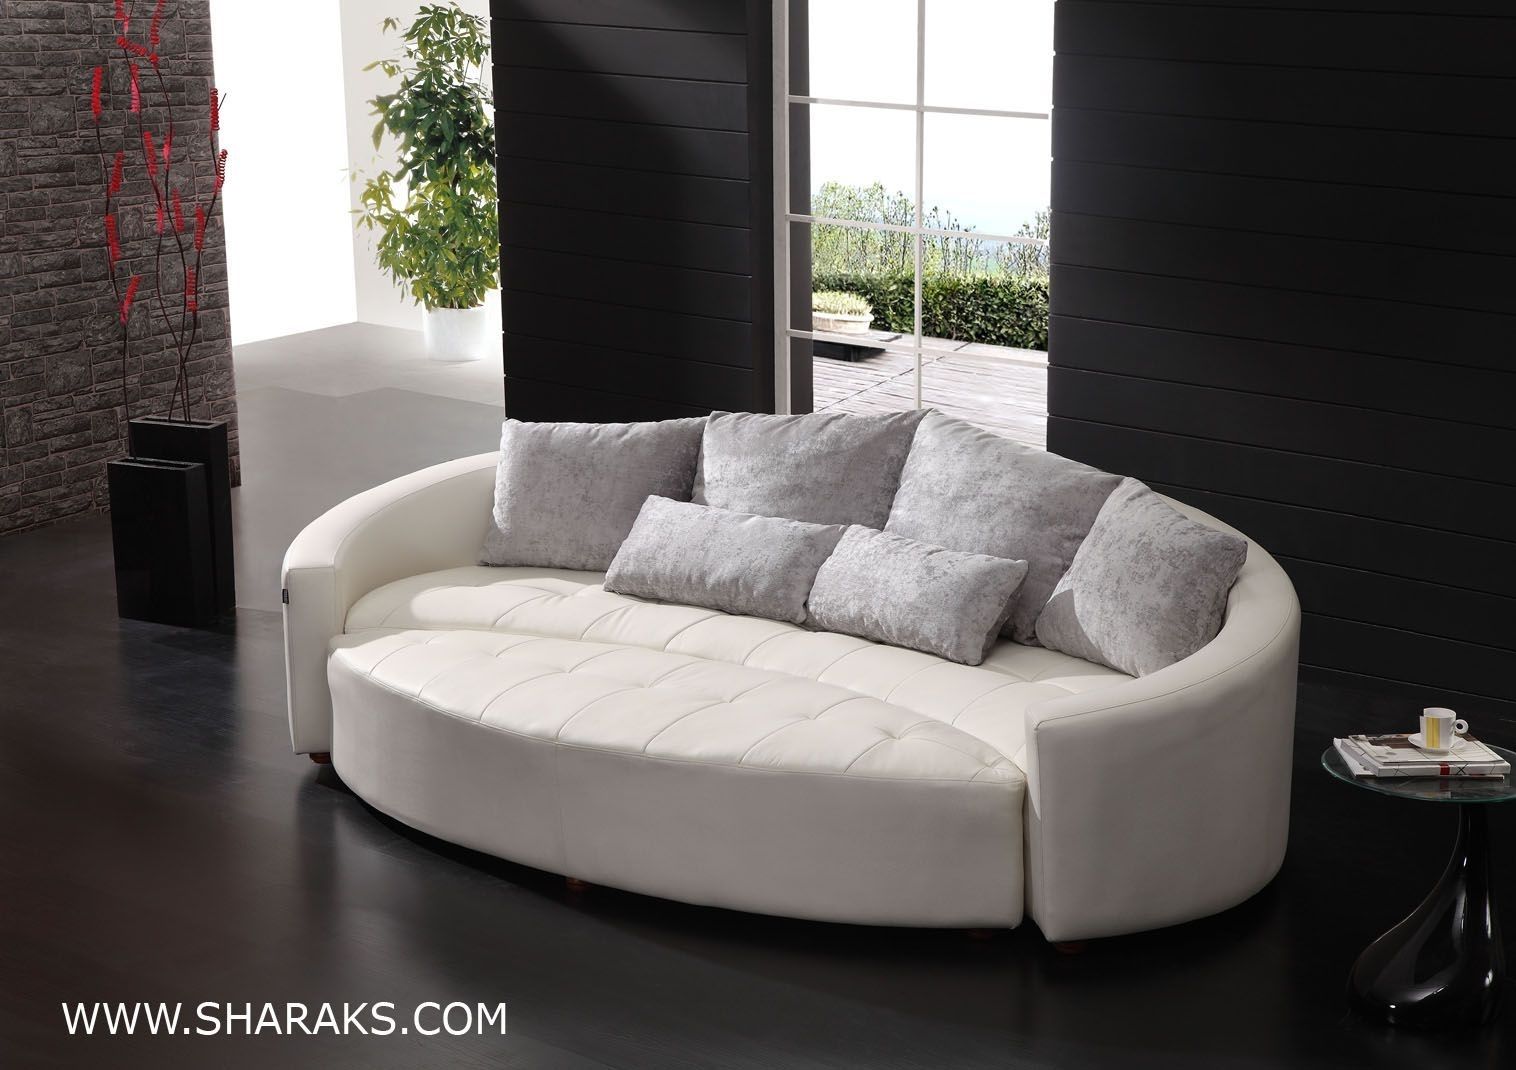 Loveseat : Curved Sofas And Loveseats Half Round Leather Couch‚ Navy Pertaining To Rounded Sofas (View 9 of 10)